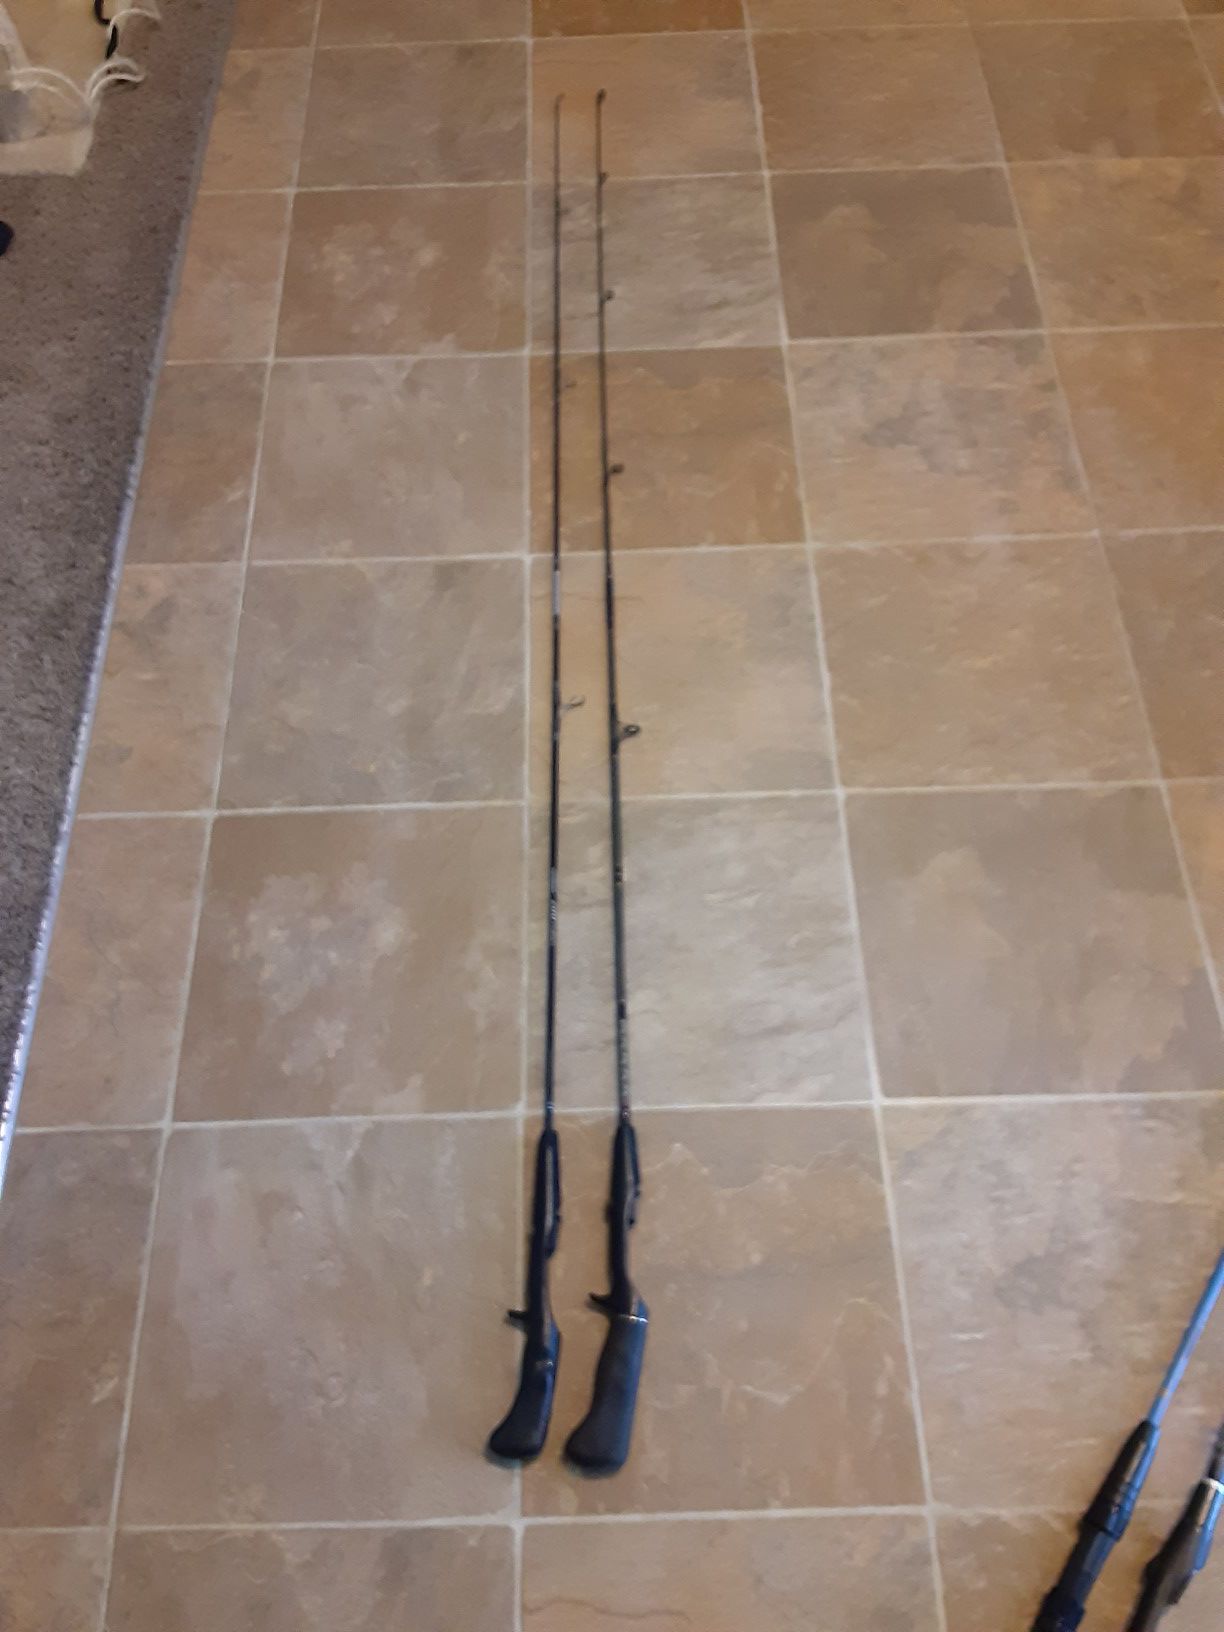 Two fishing Rods